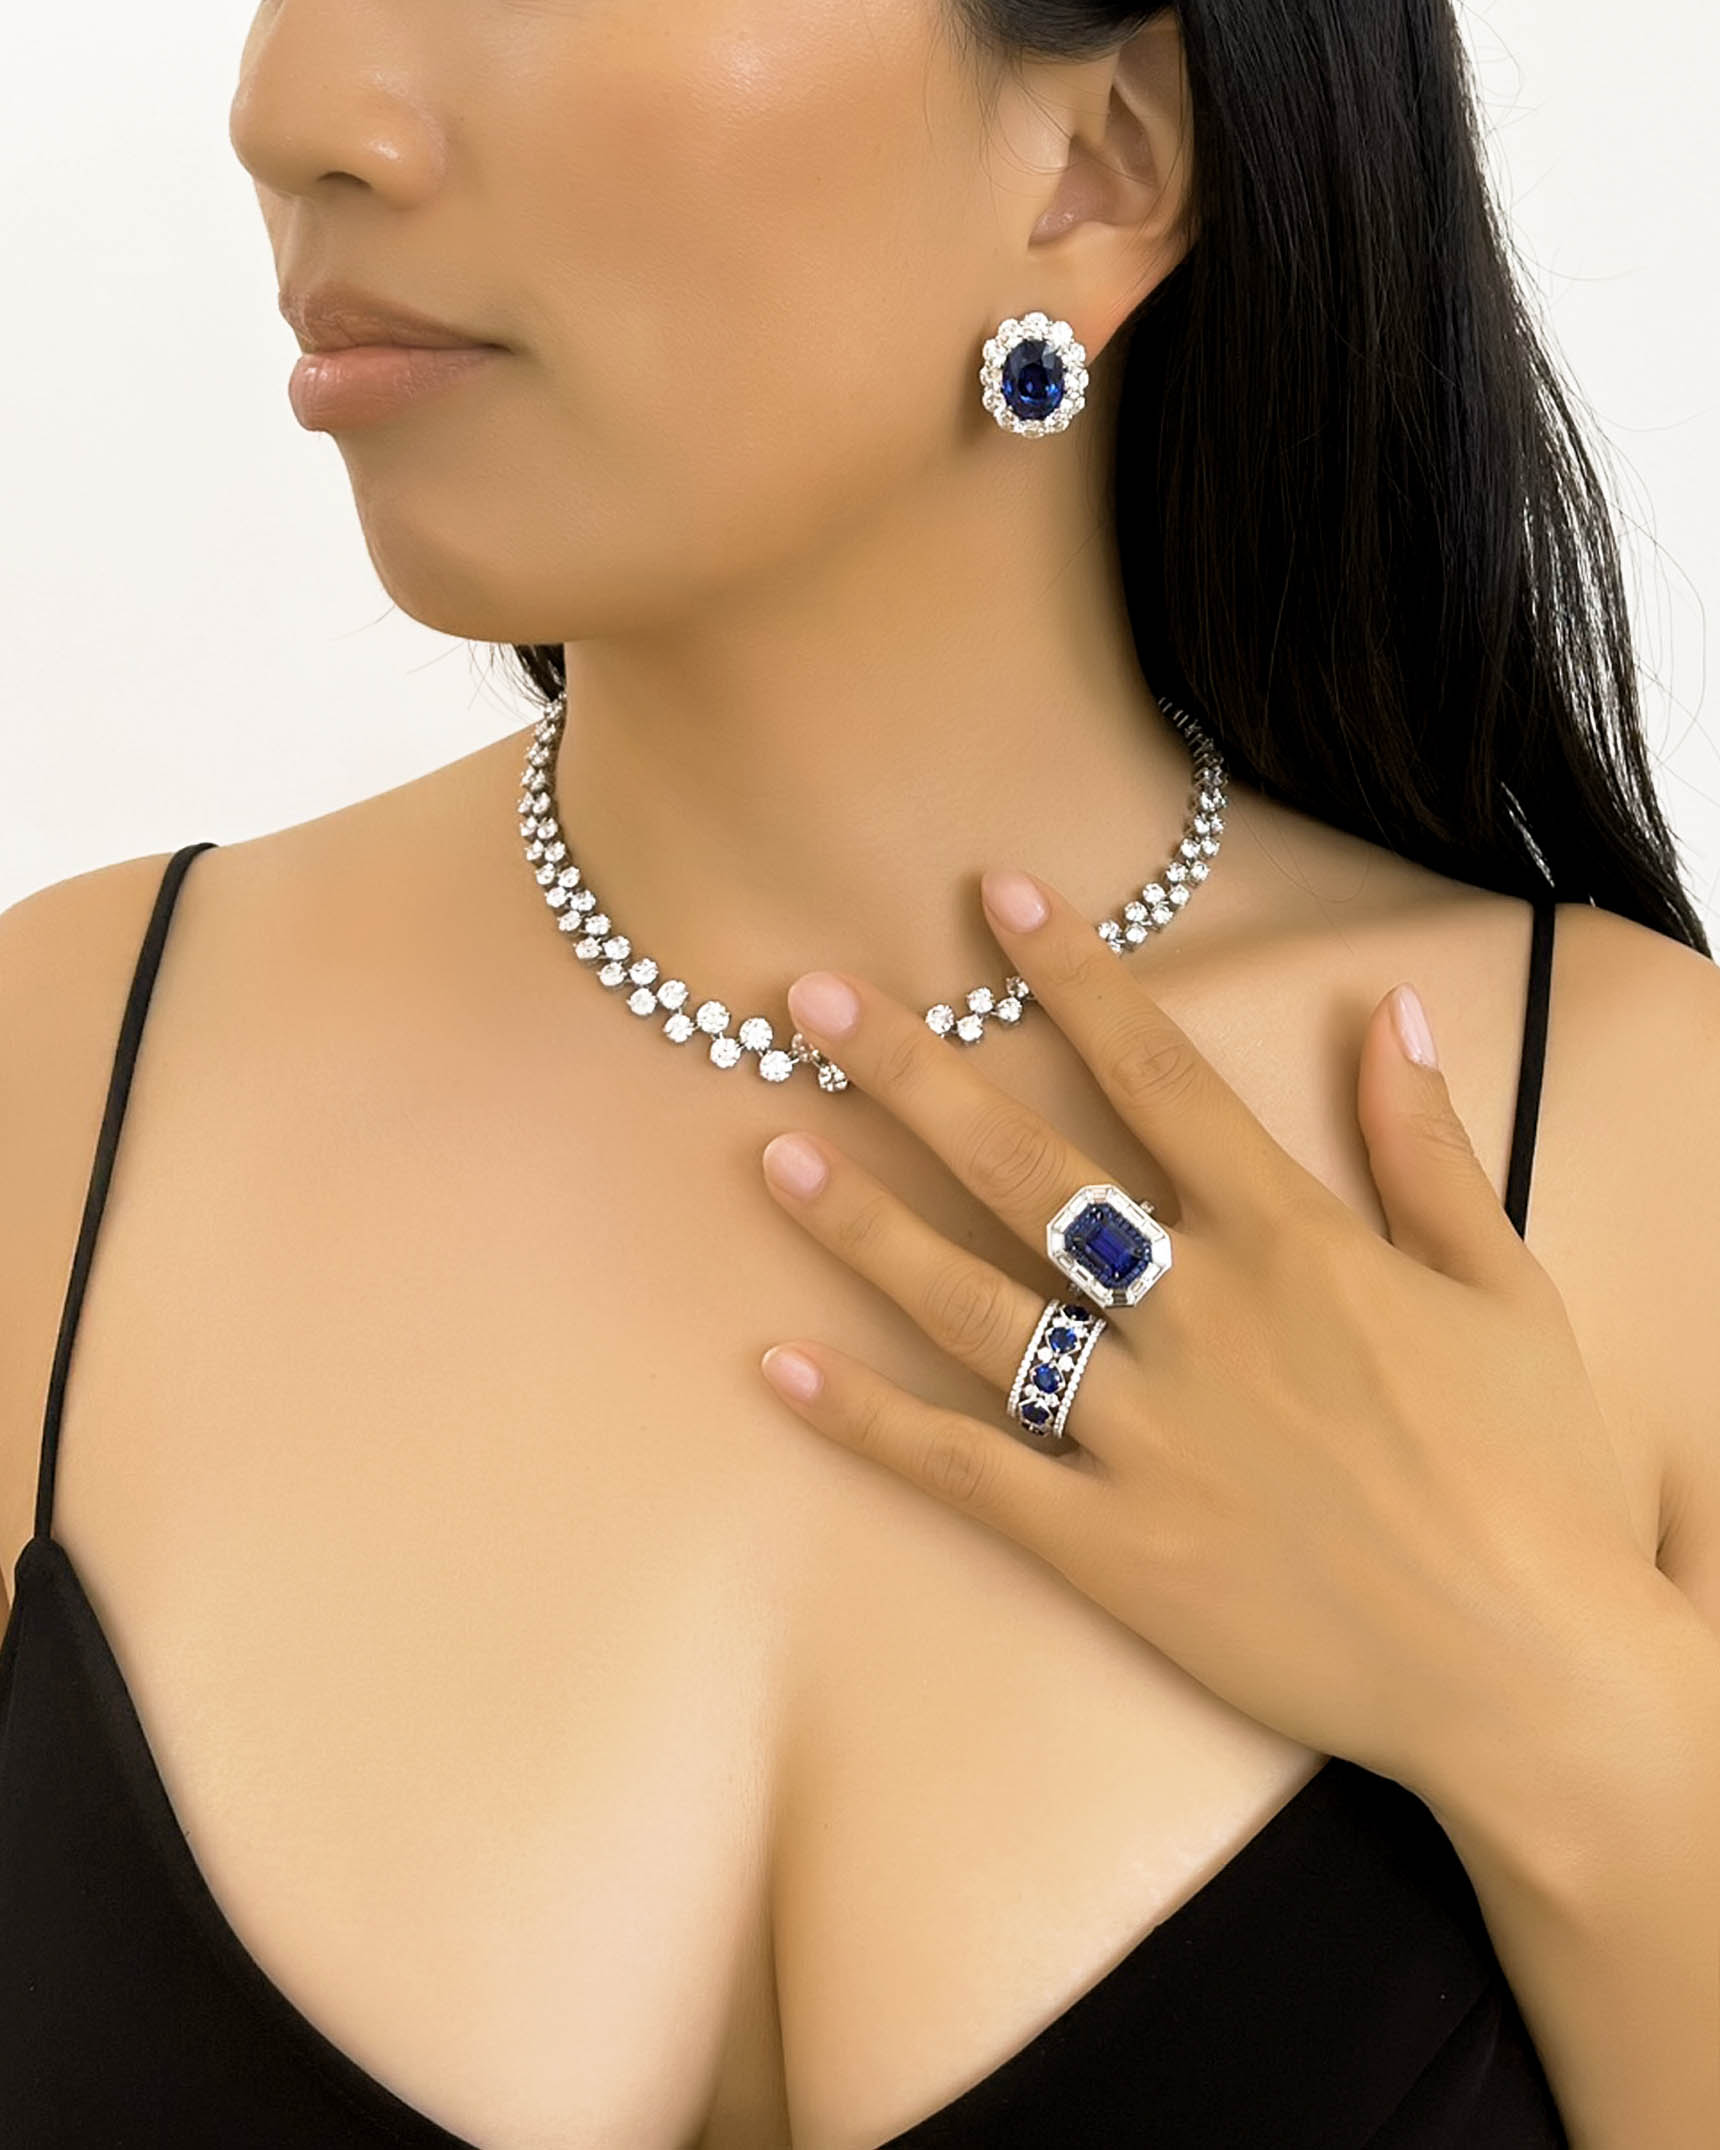 Blue Sapphire and Diamond Earrings_ Necklace and Rings ECDKK02847 – NDOTK00422 – RACDS00687 – RCDSA03052 (second look)